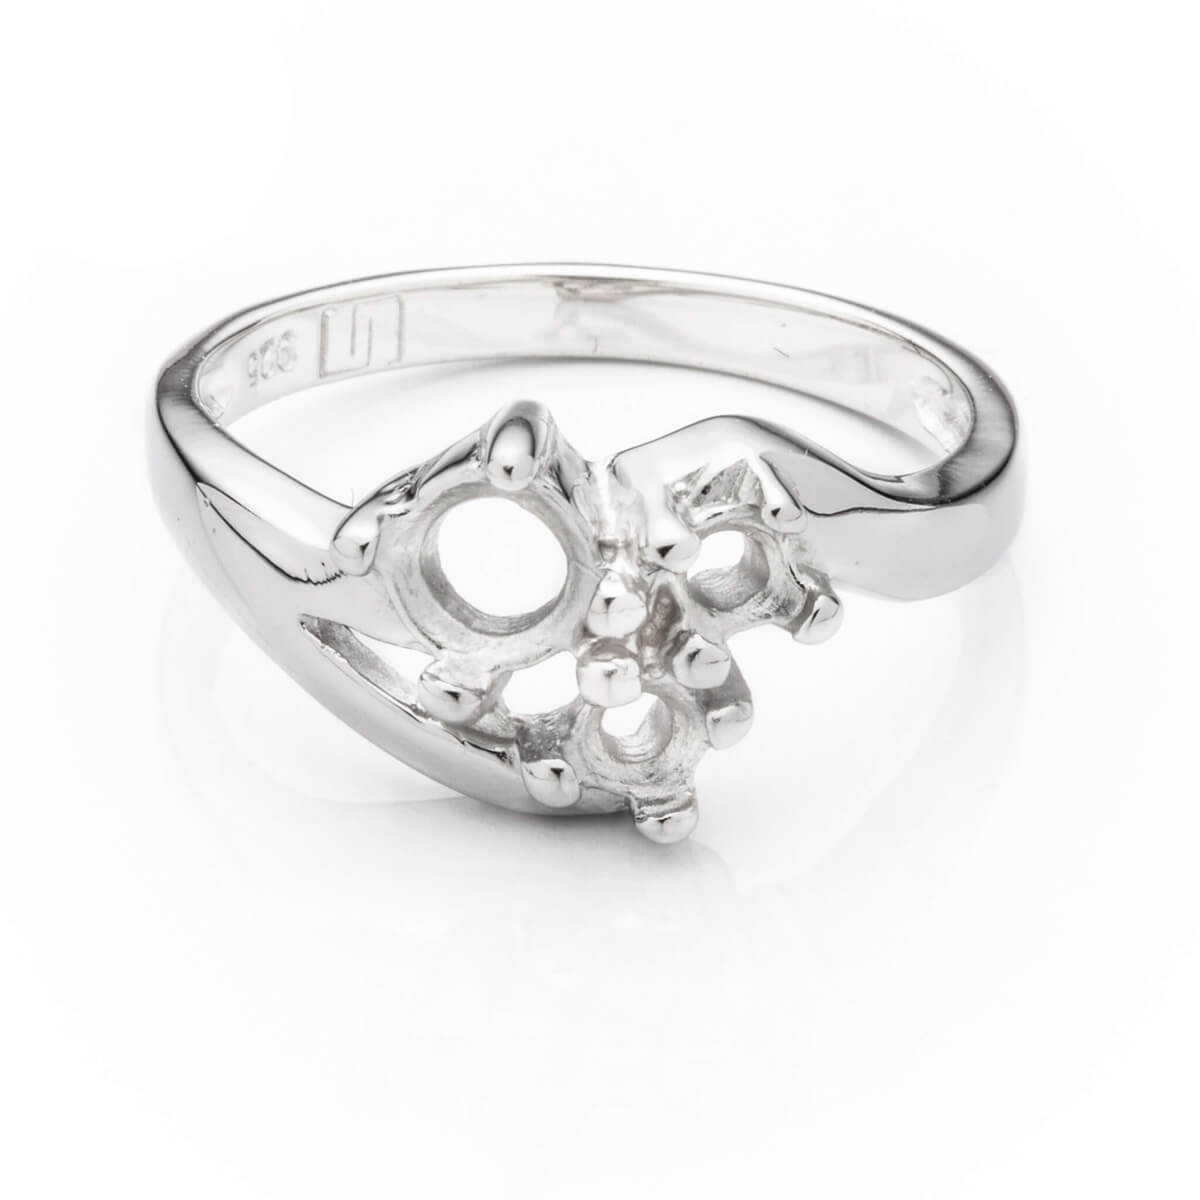 Adjustable Three-Stone Ring with Round Prongs Mountings in Sterling Silver 5mm and 3mm